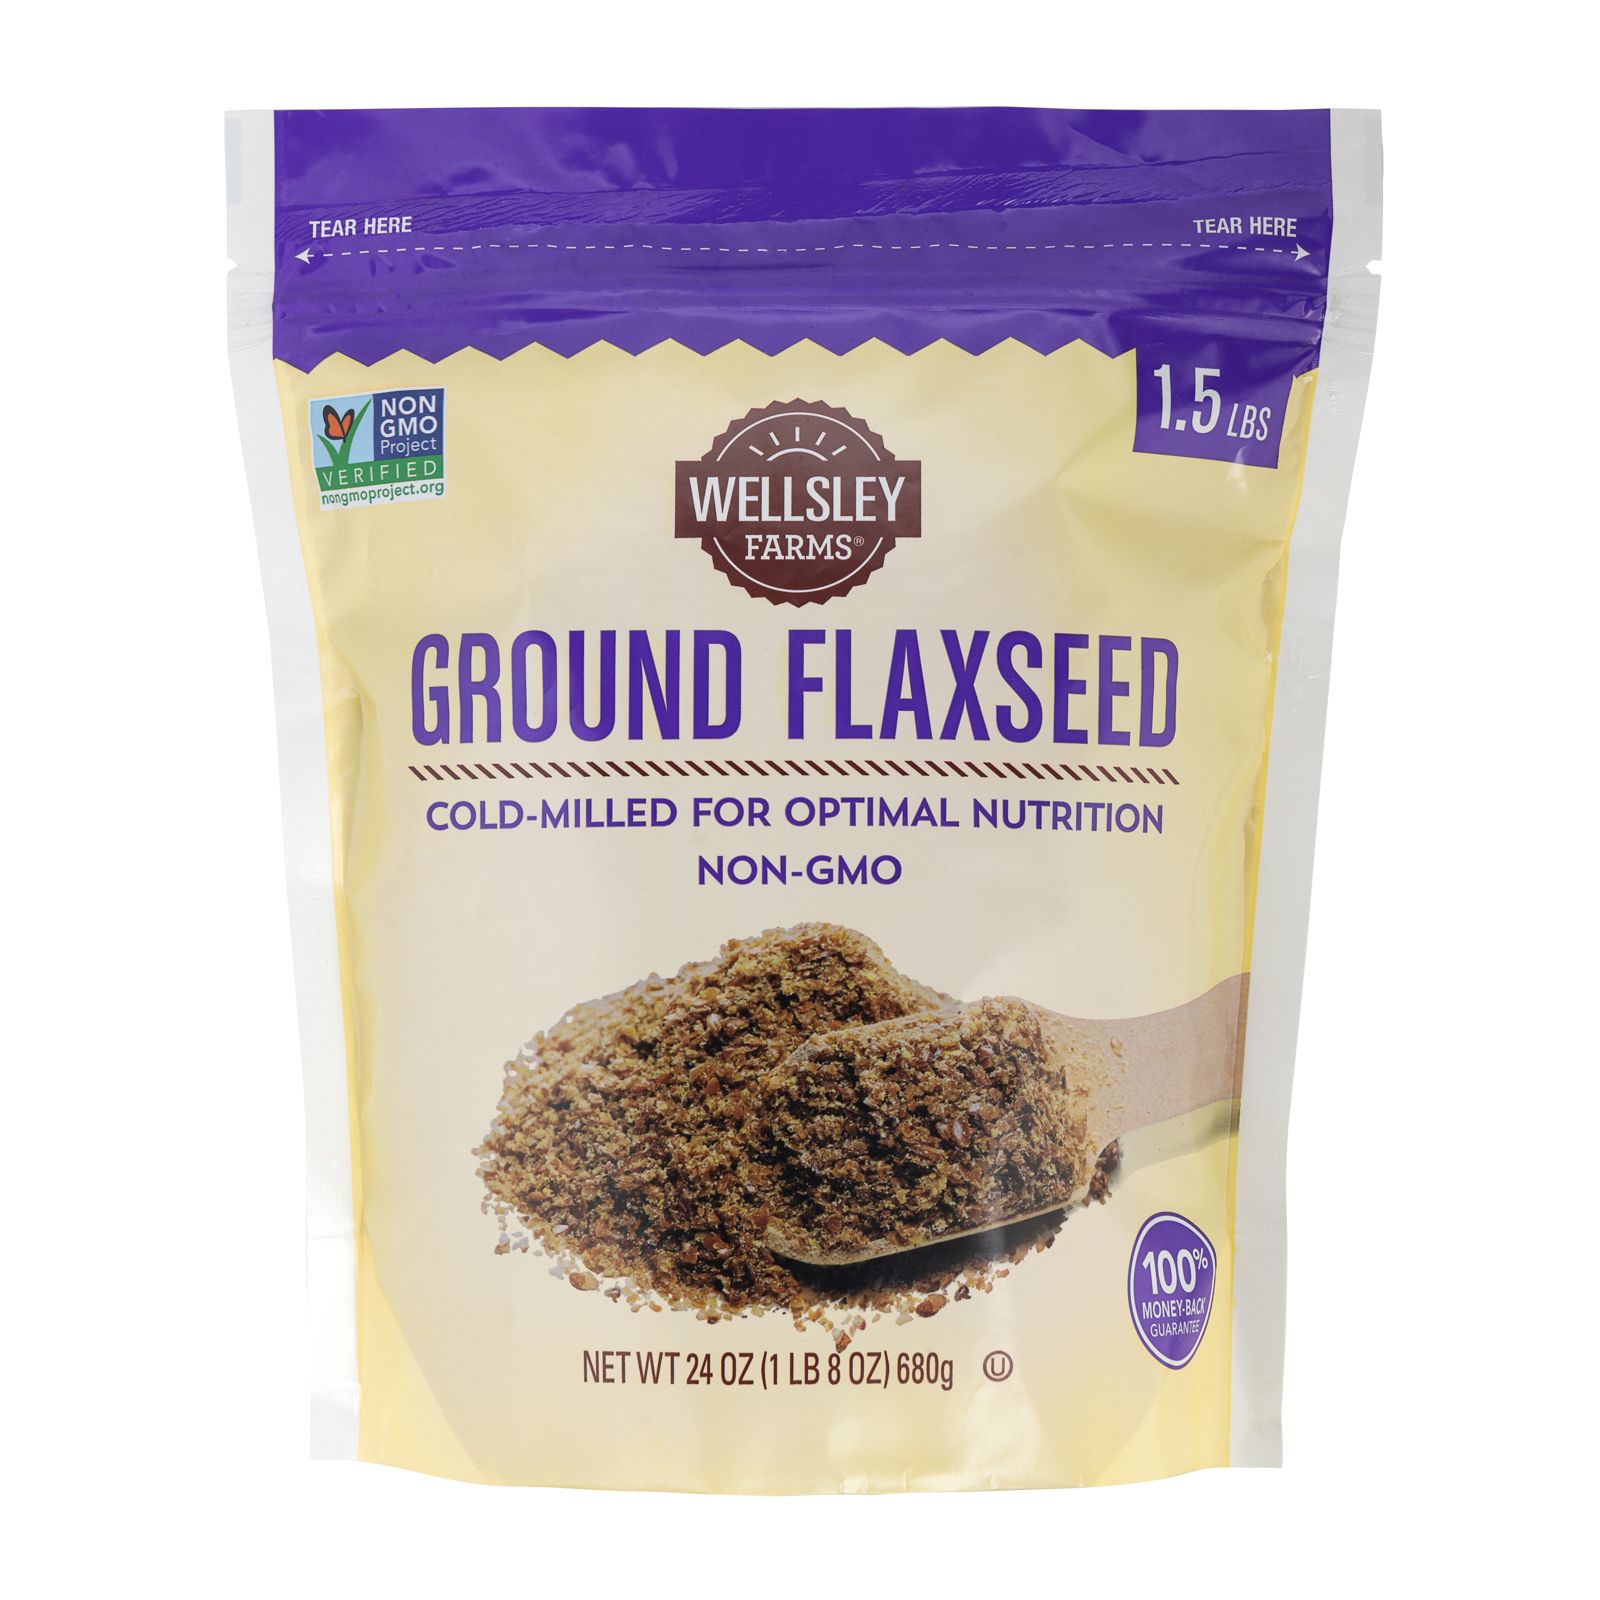 Flaxseed Review & Top Picks 